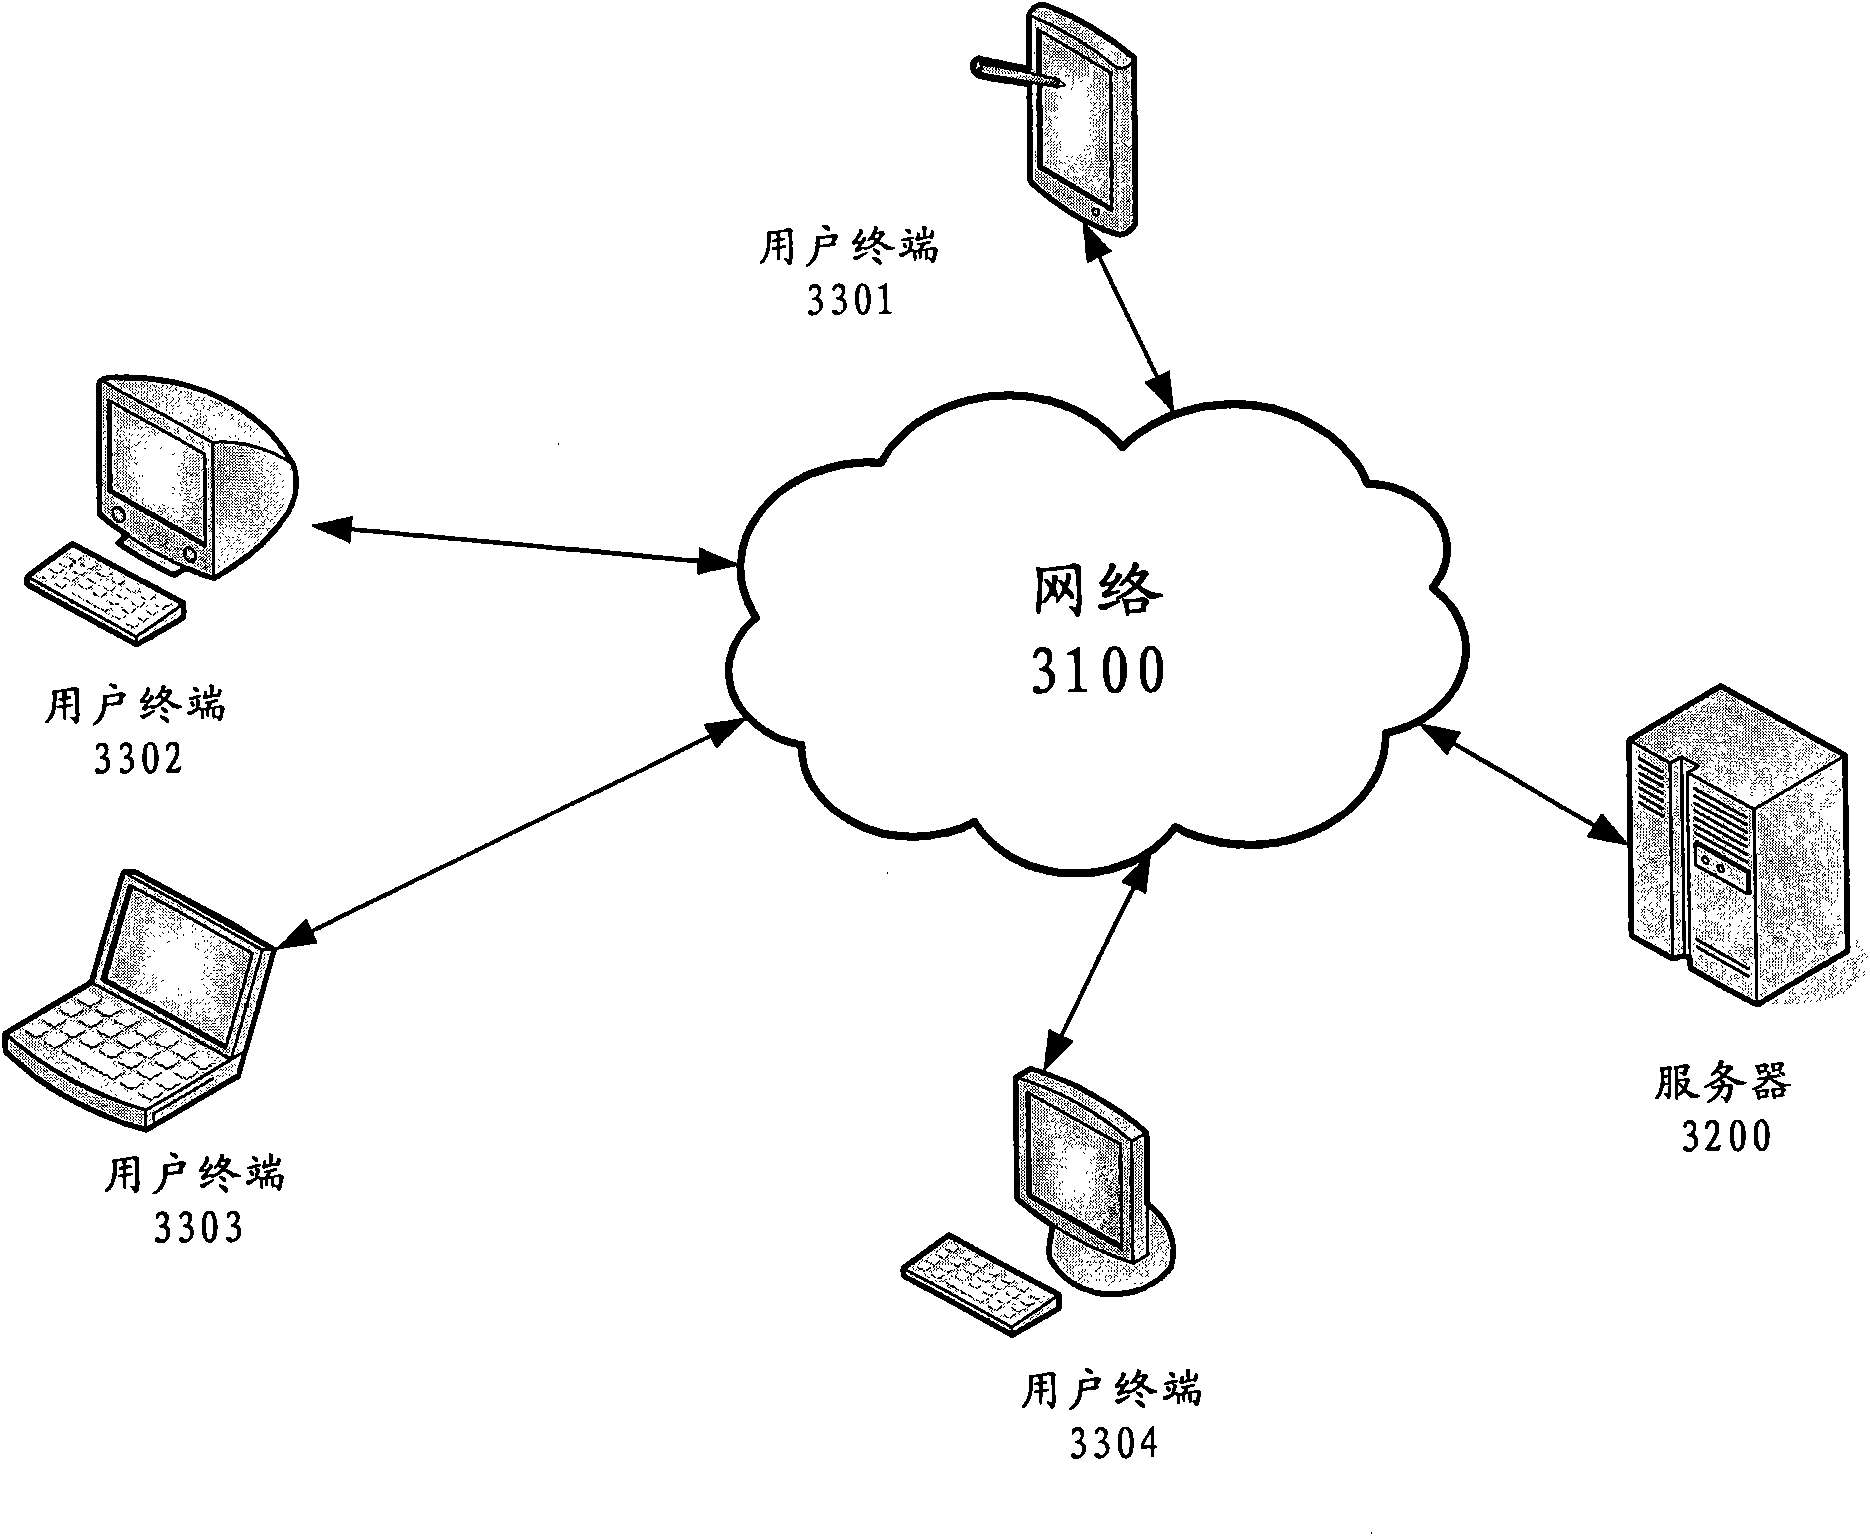 Method, server device and client device for supporting plurality of simultaneous online conferences